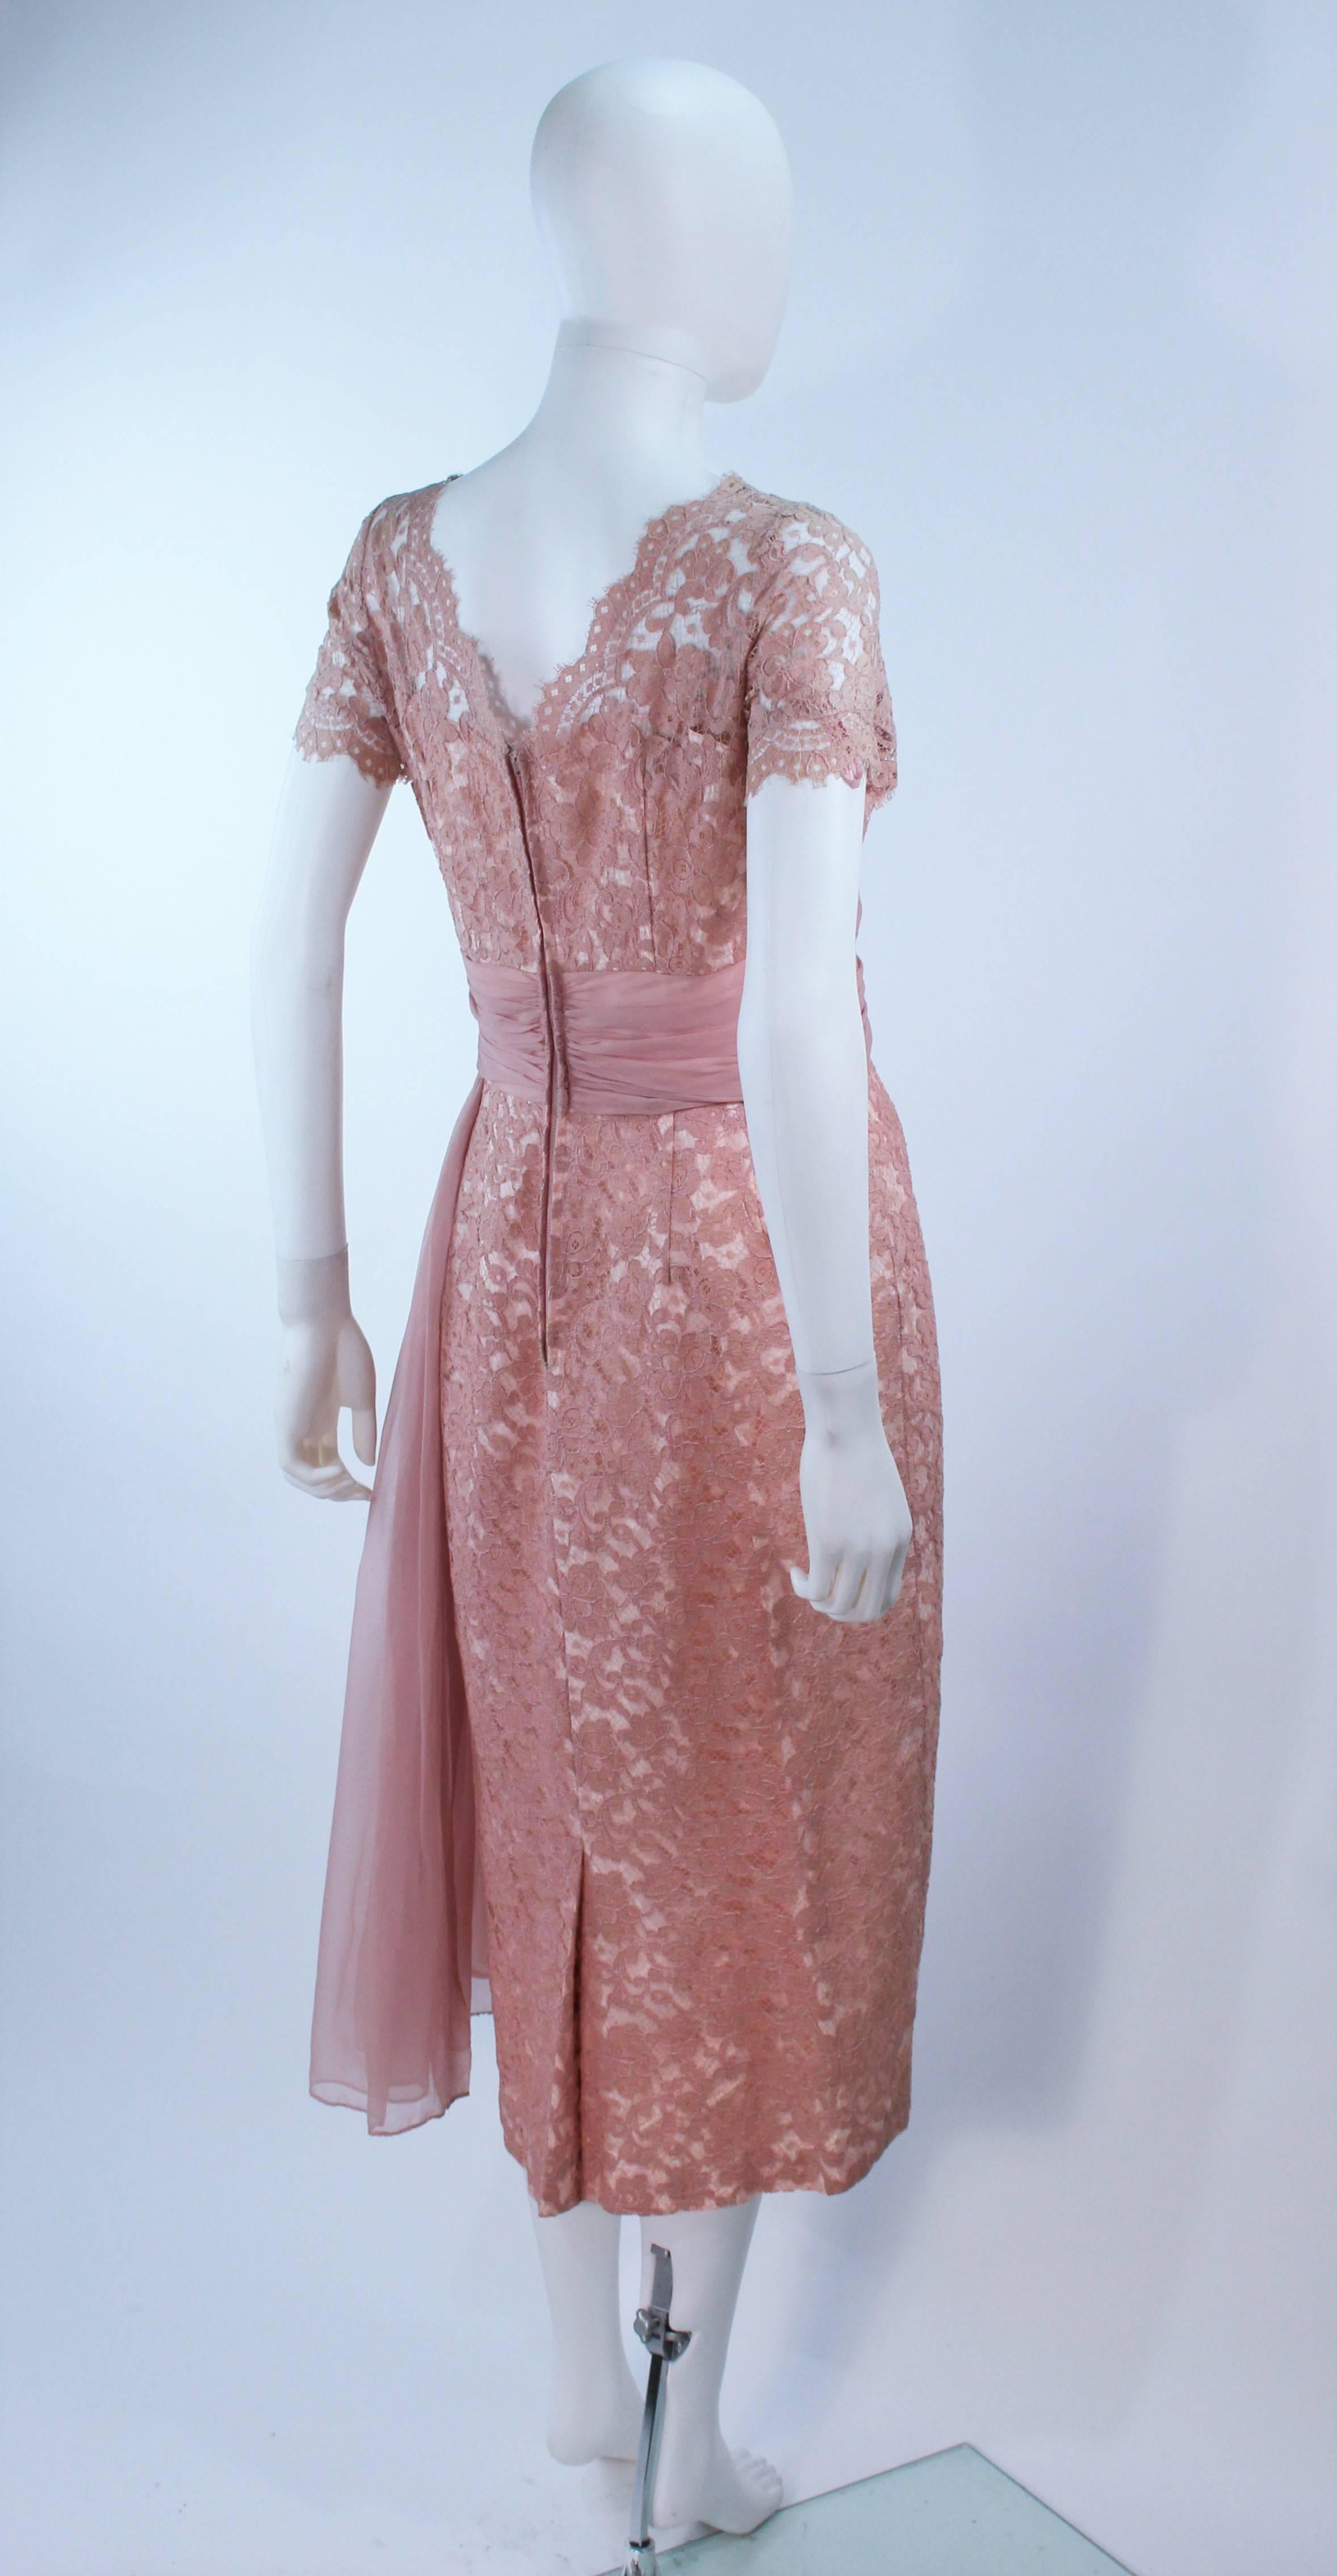 Women's 1950's Peach Lace Cocktail Dress with Draped Chiffon Waist Size 8 10 For Sale